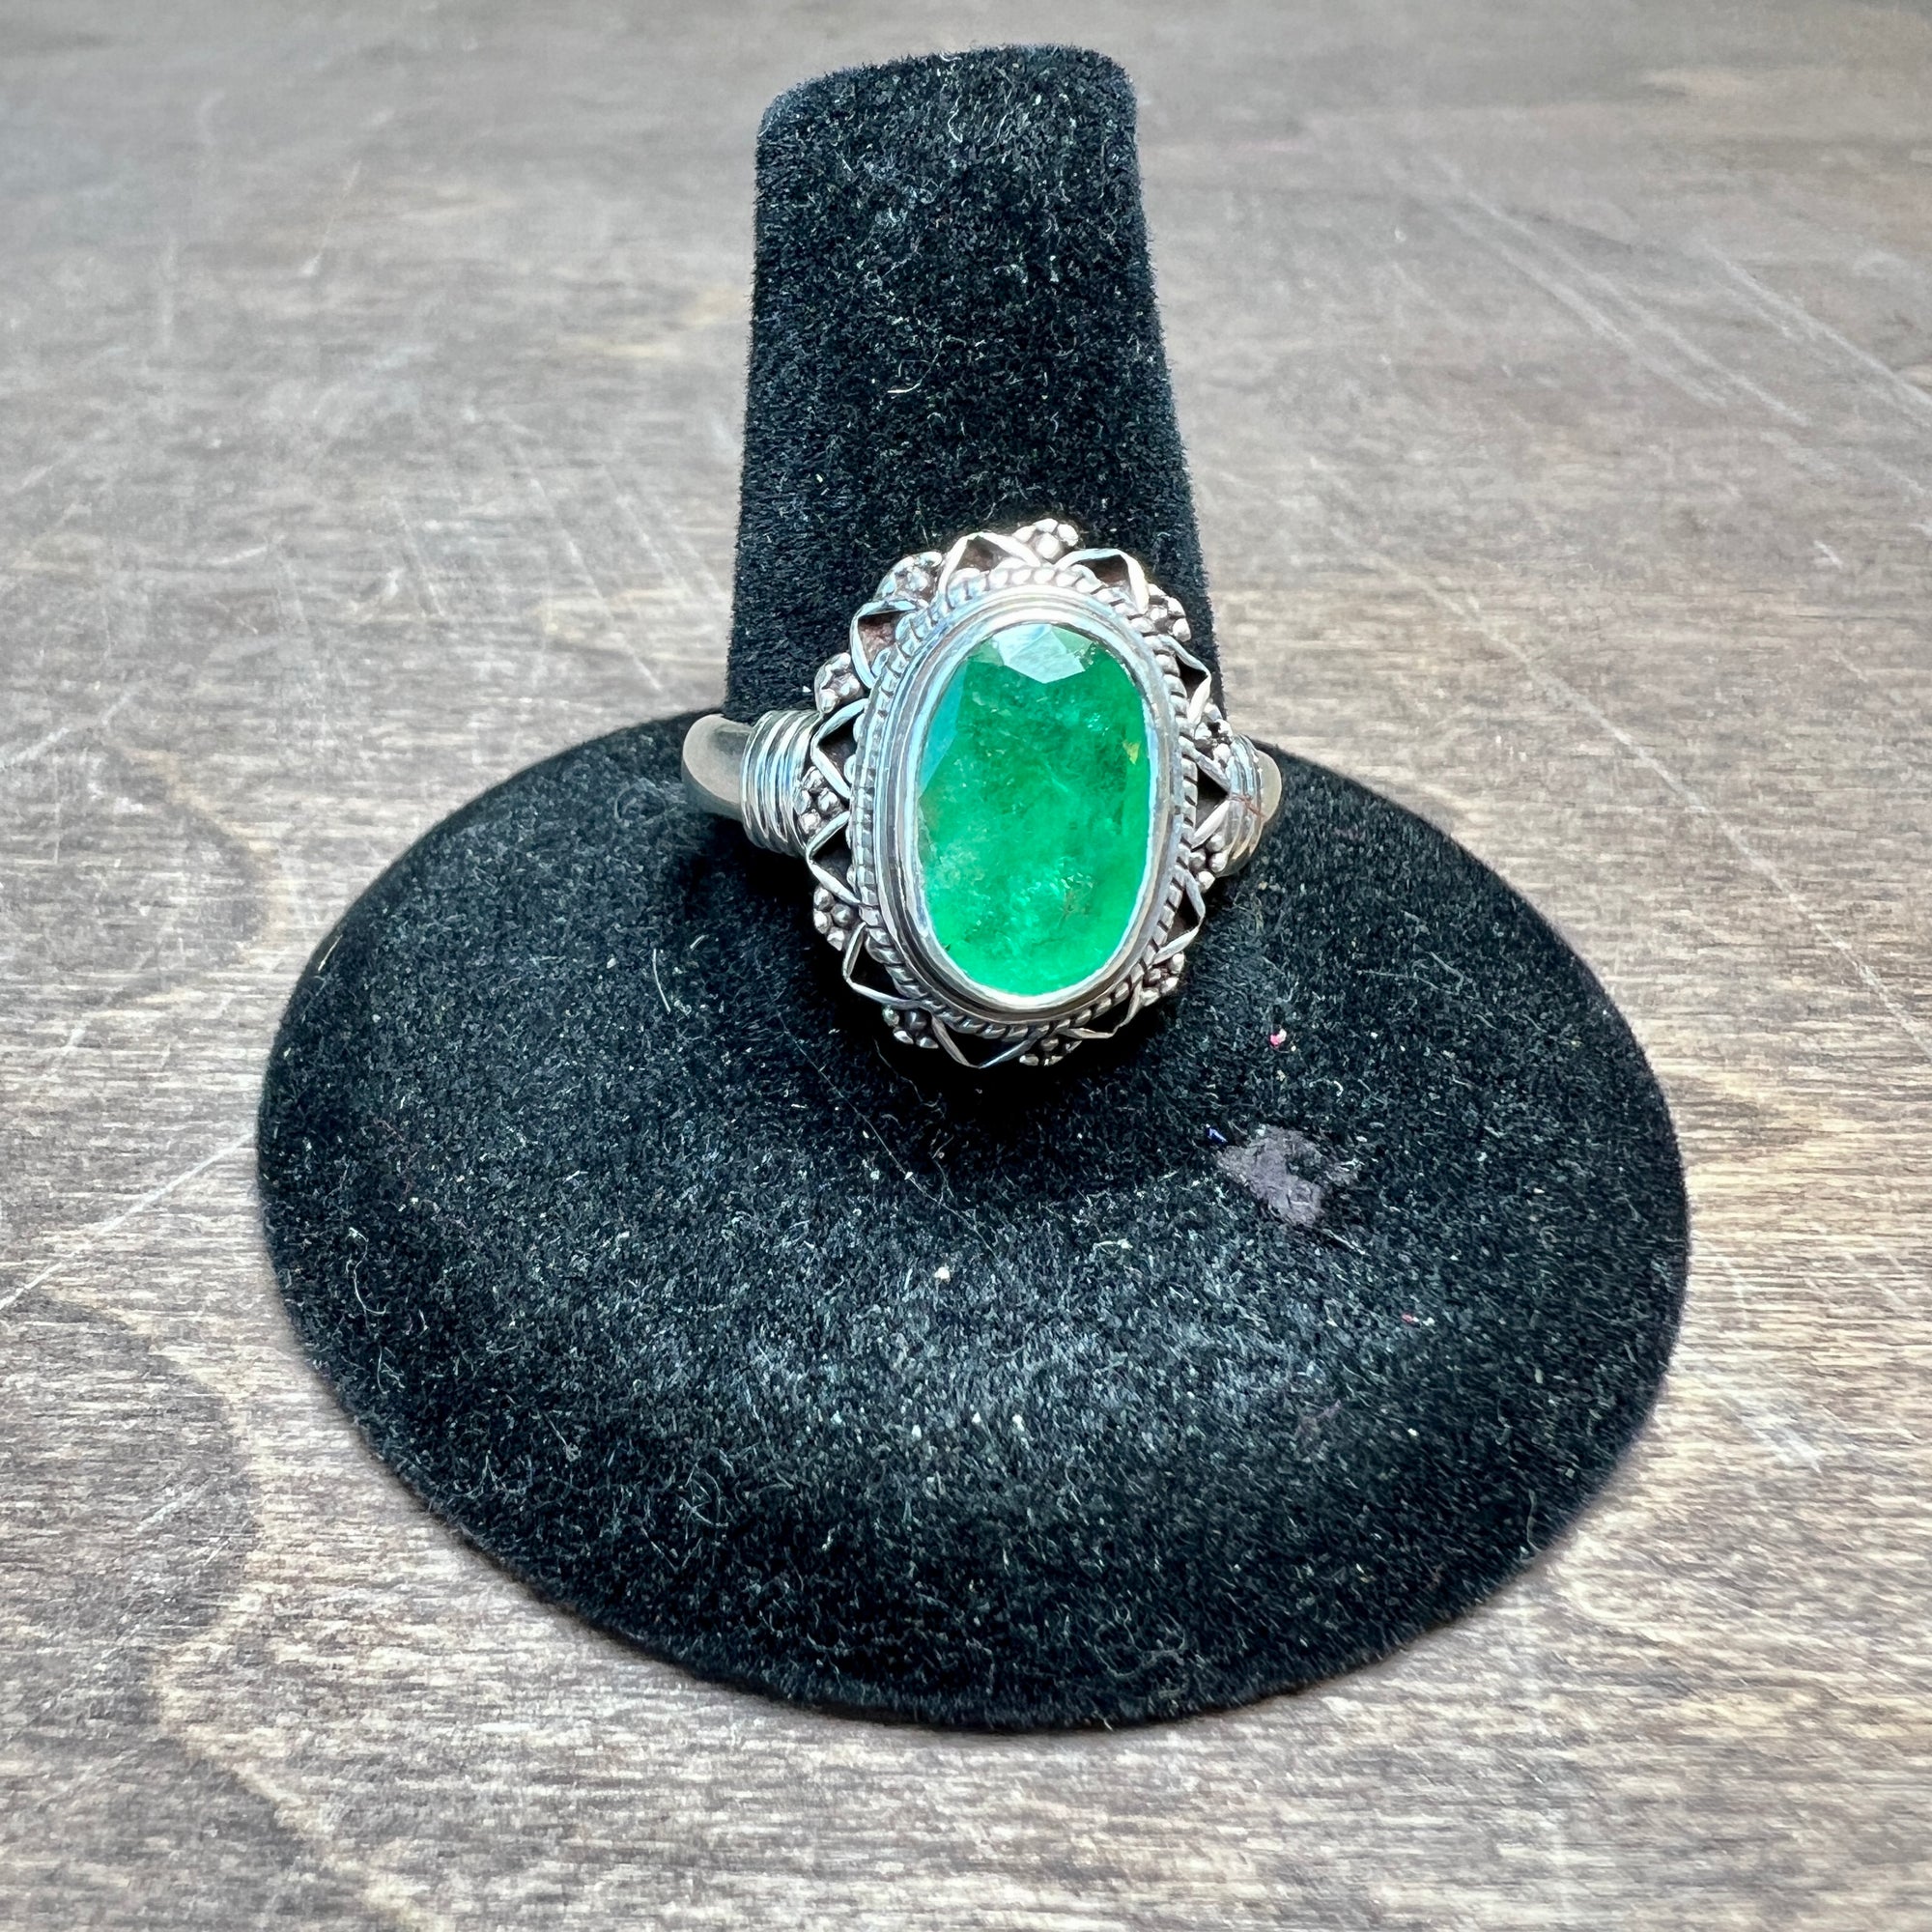 Real Indian Emerald Stone Sterling Silver Ring Valentine Gift Emerald Ring  Mens | eBay